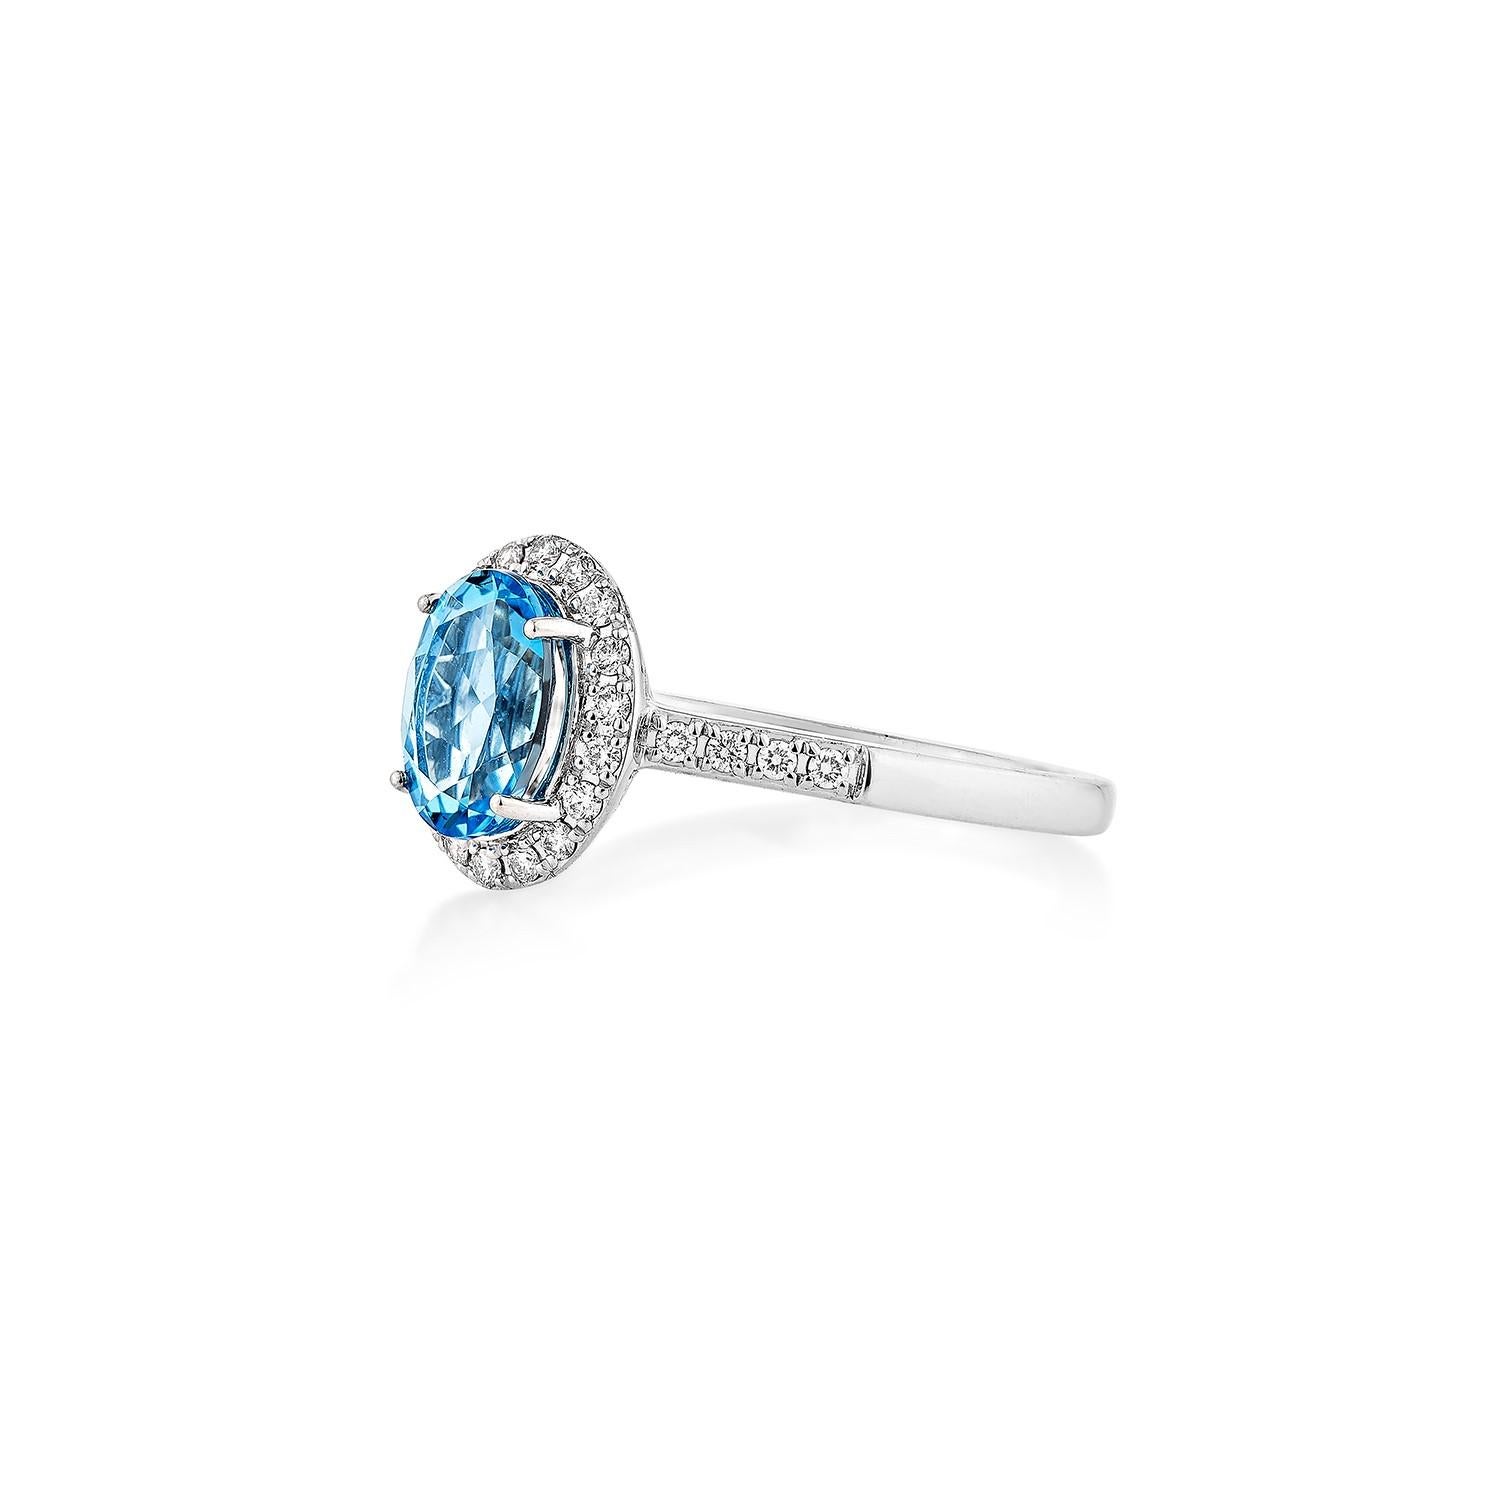 Oval Cut 1.49 Carat Swiss Blue Topaz Fancy Ring in 14Karat White Gold with White Diamond. For Sale